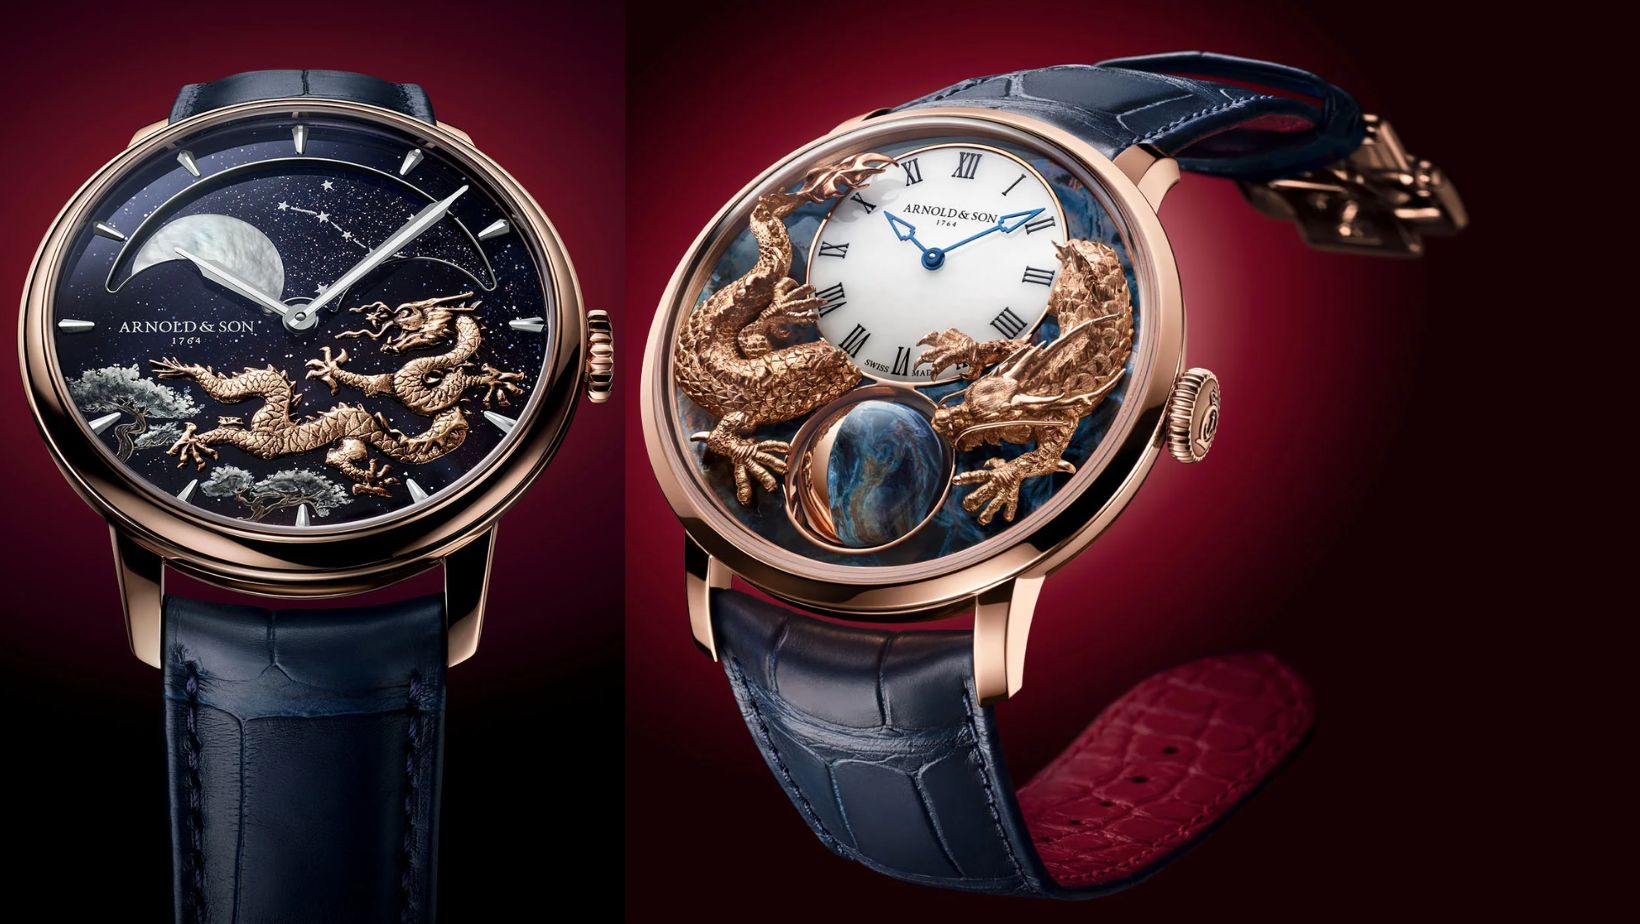 Arnold & Son introduces 2 timepieces: the Luna Magna and the Perpetual Moon.